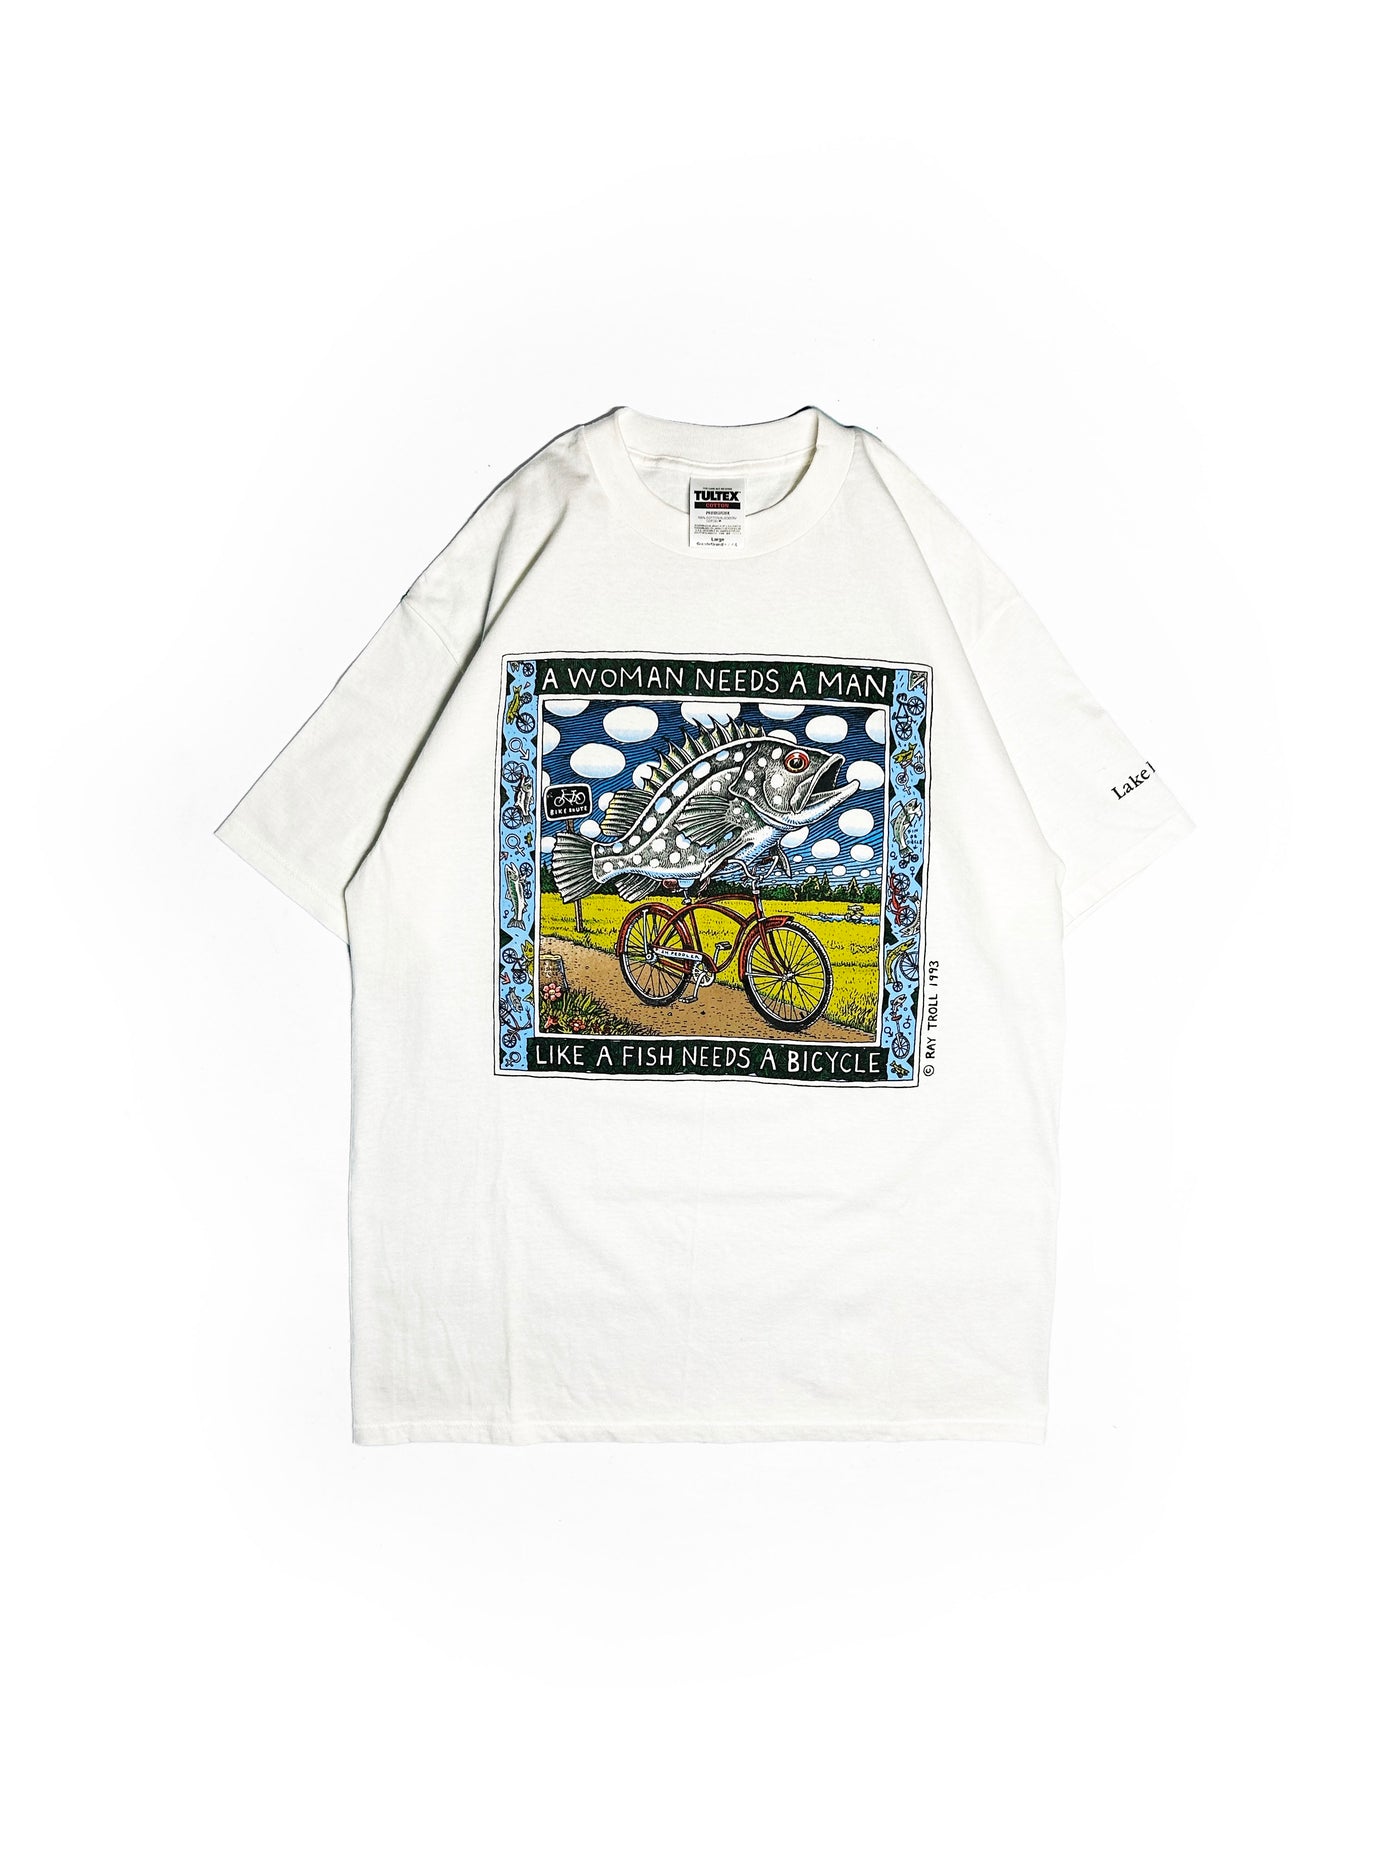 Vintage 1993 ‘Like a Fish Needs a Bicycle’ T-Shirt